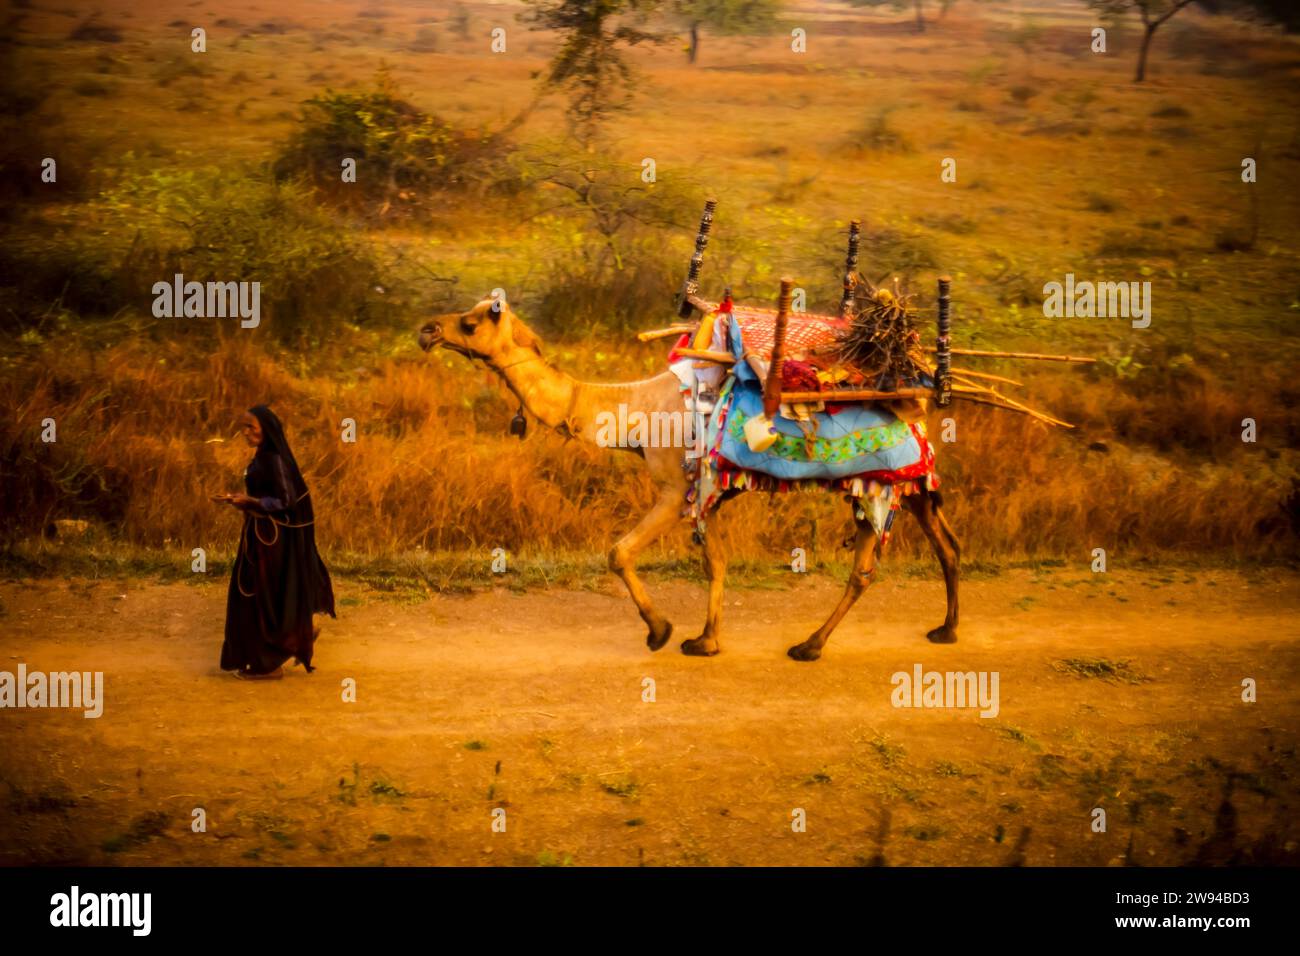 Camel and a women walking on a dirt road in a Village in India. Stock Photo